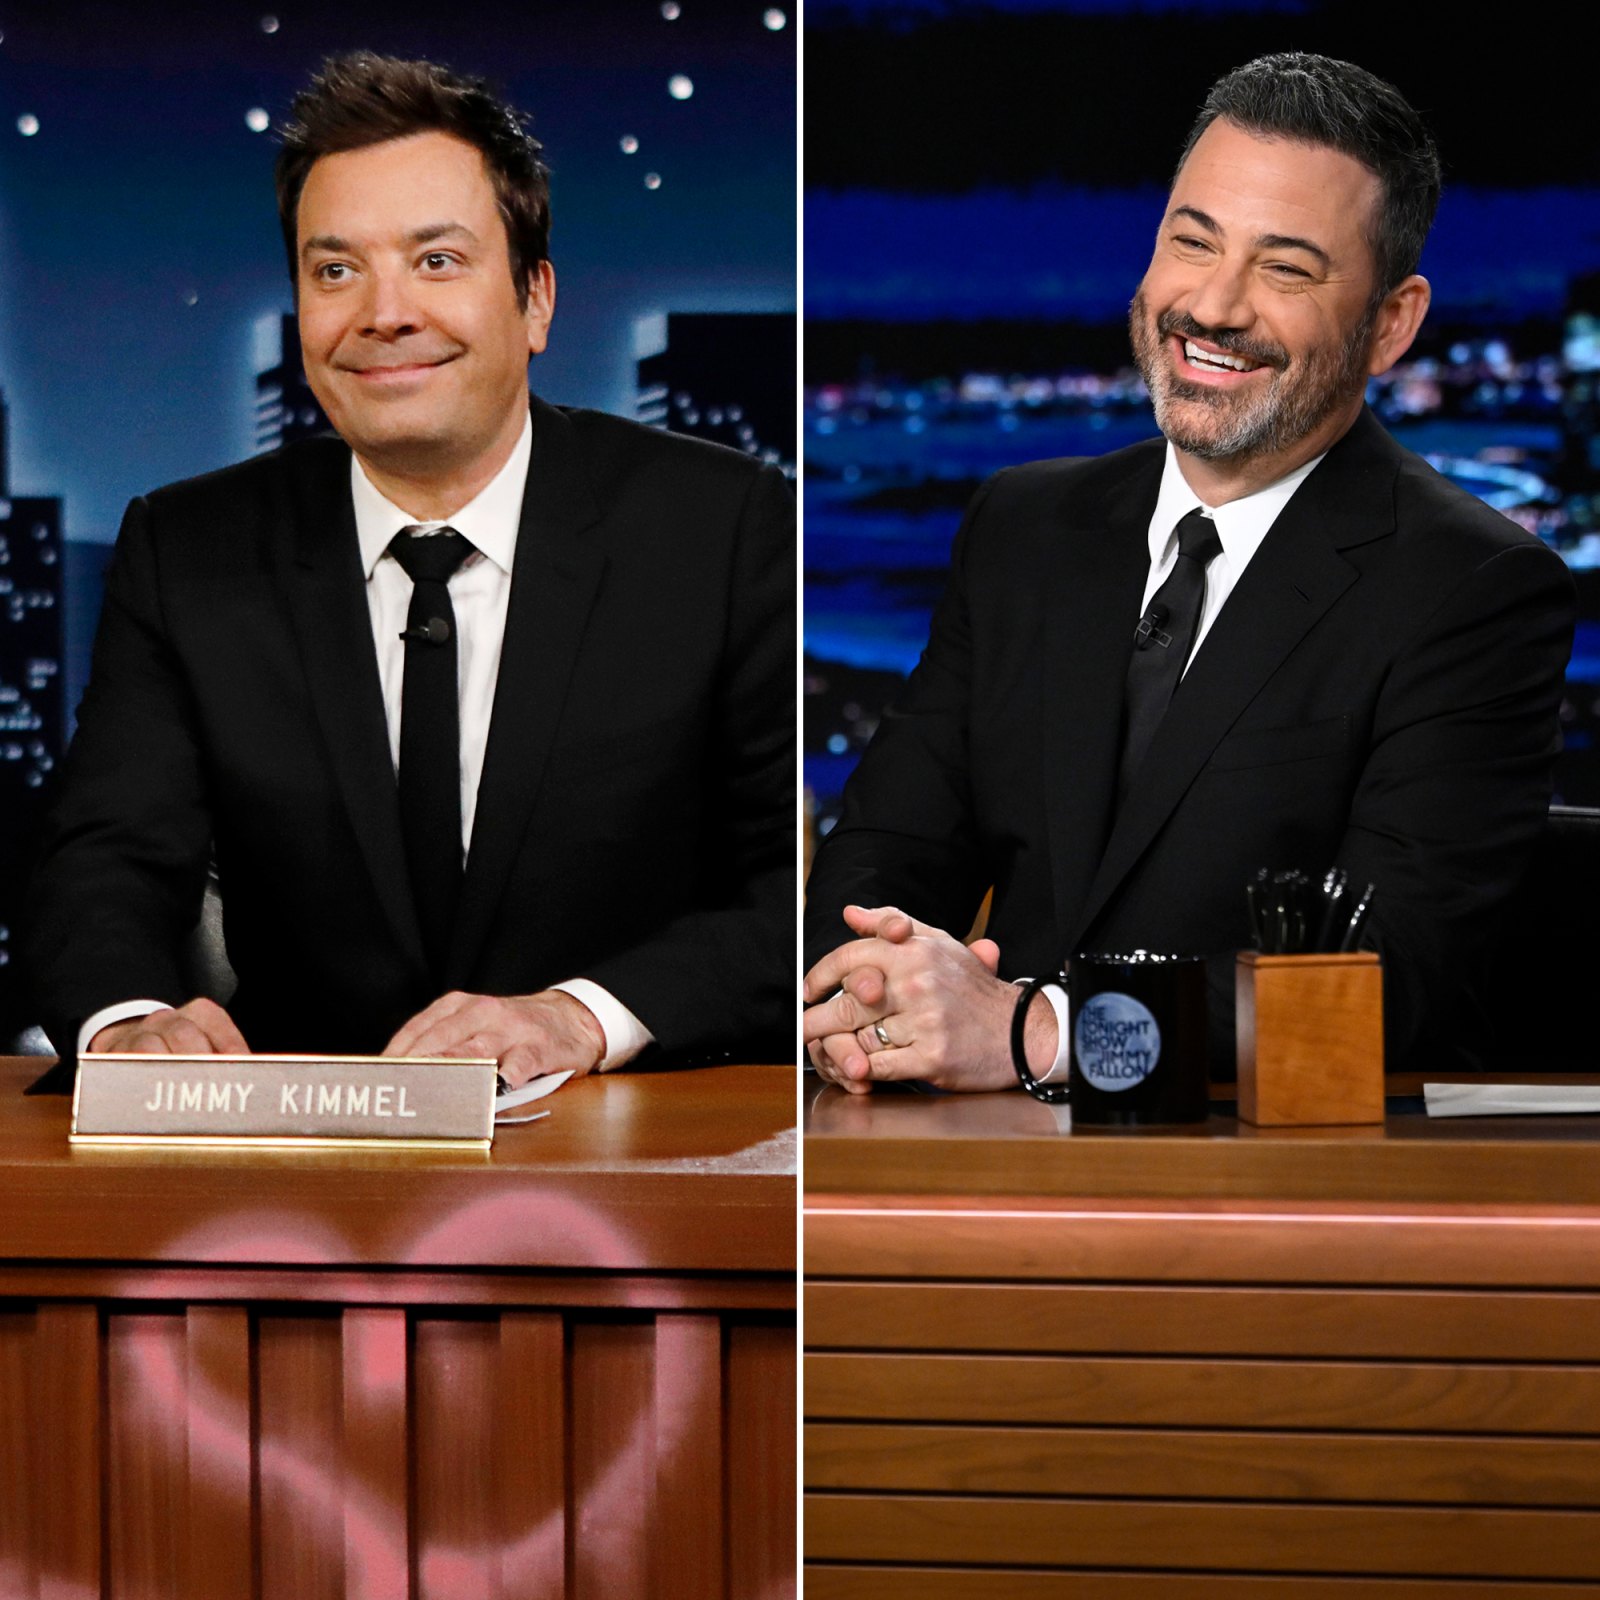 Late-Night Swap! Jimmy Fallon, Jimmy Kimmel Switch Shows on April Fools' Day